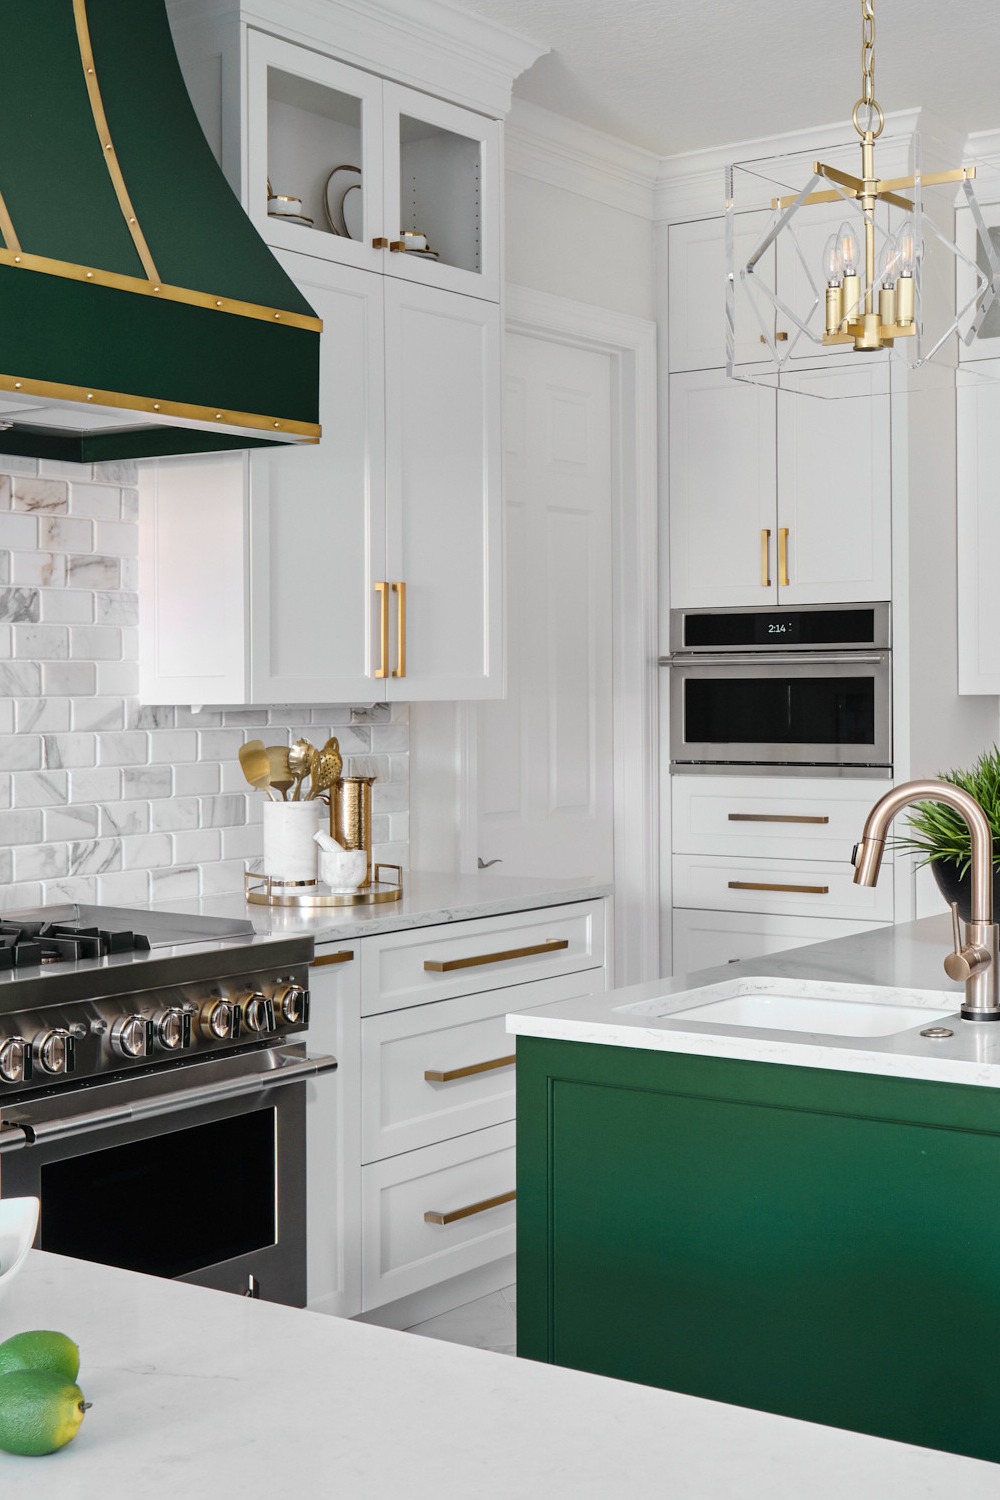 Two Tone Kitchen Cabinets Green Cabinets Undermount Sink Quartz Countertops Shaker Cabinets